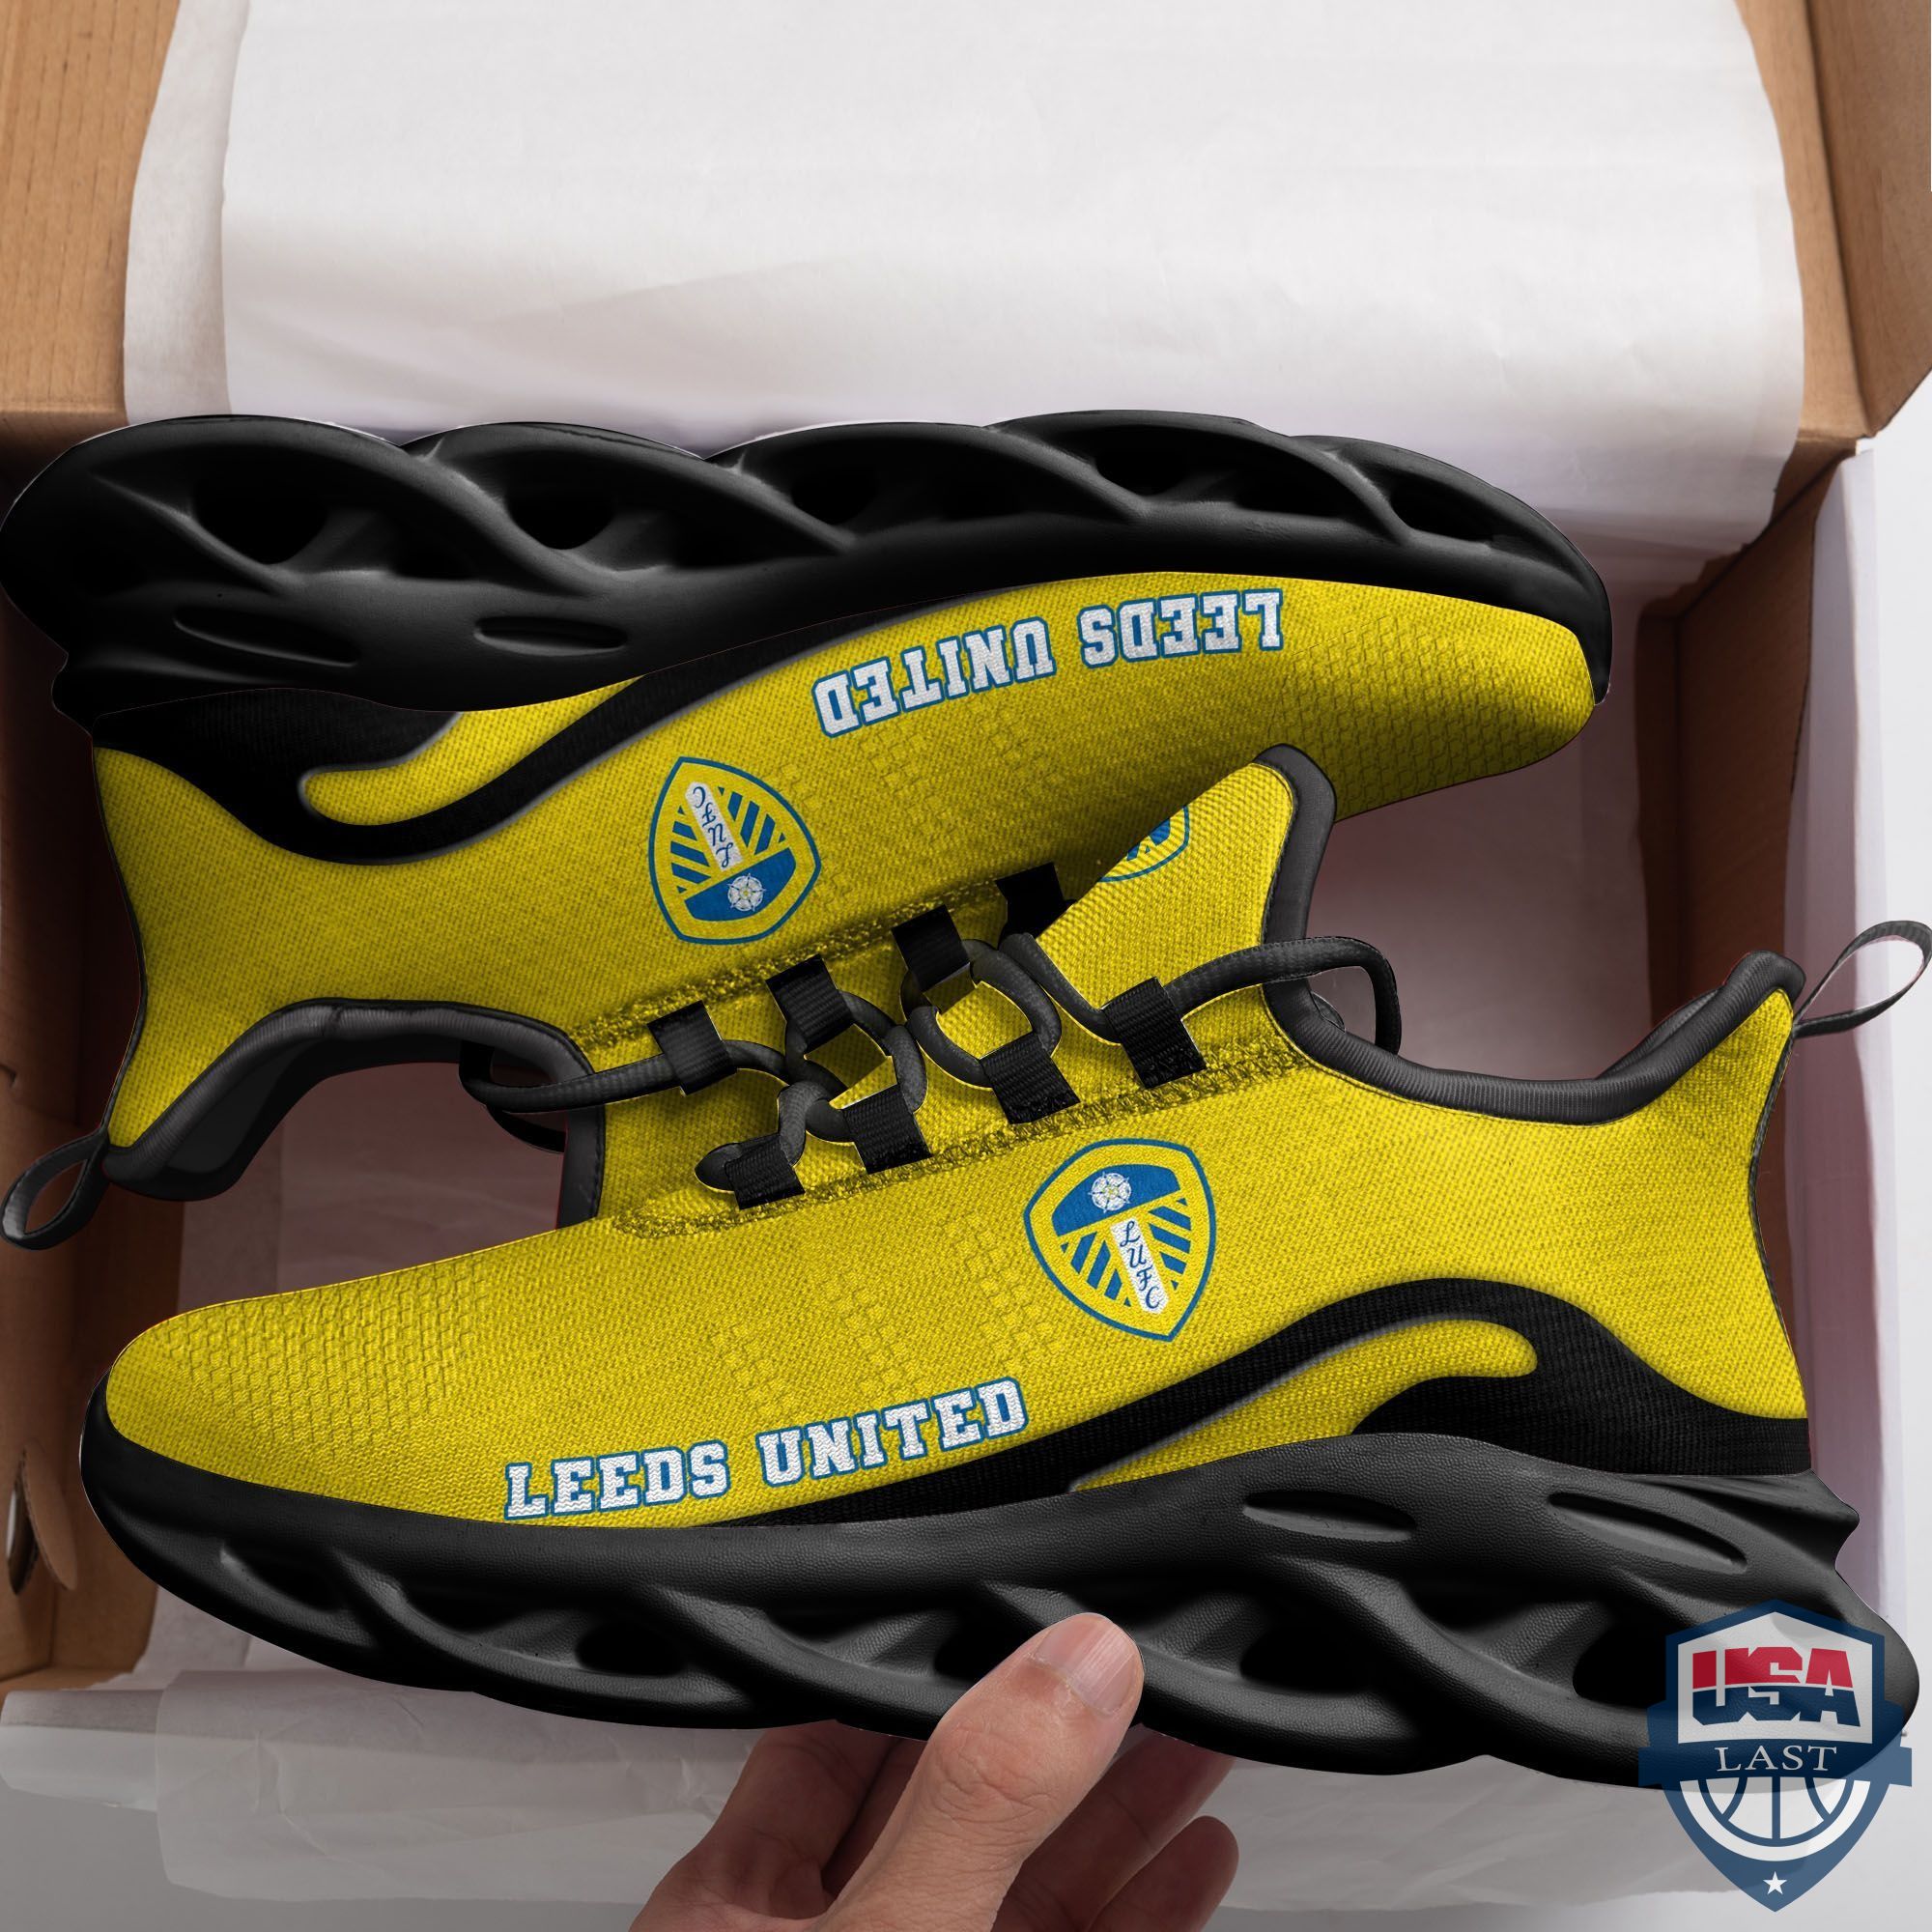 EPL Leeds United Max Soul Clunky Sneaker Shoes